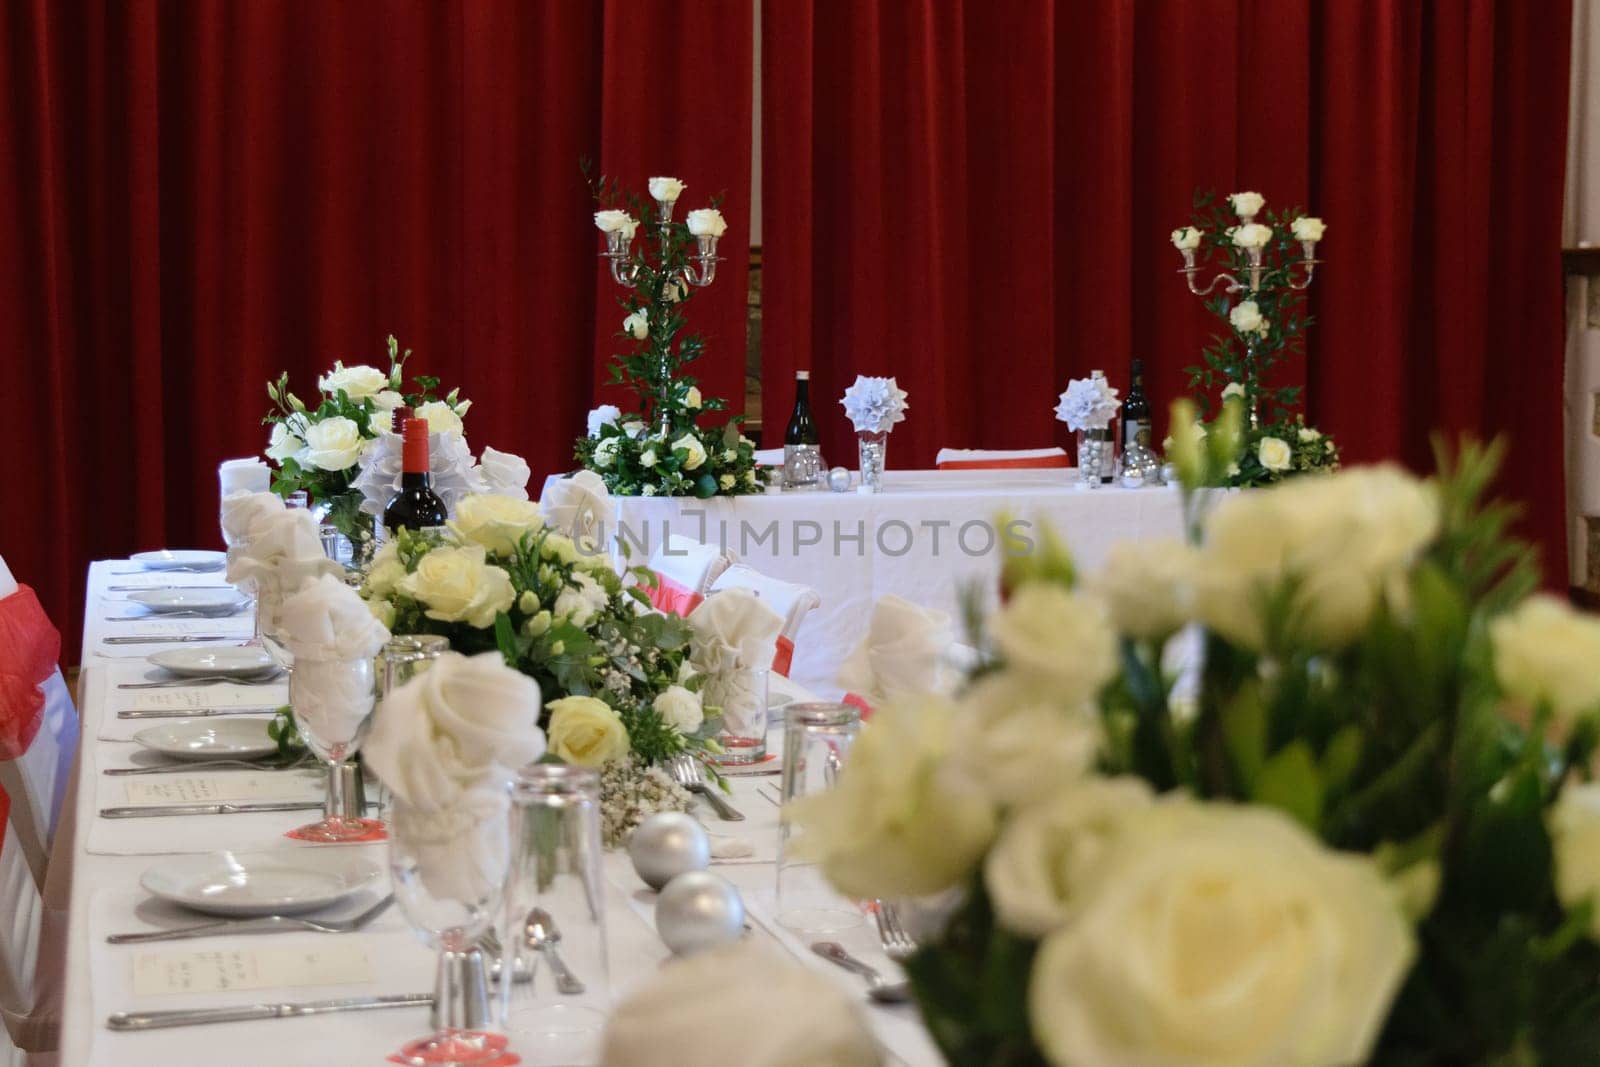 Elegant wedding reception setup with white floral arrangements, red curtains, and a long dining table.